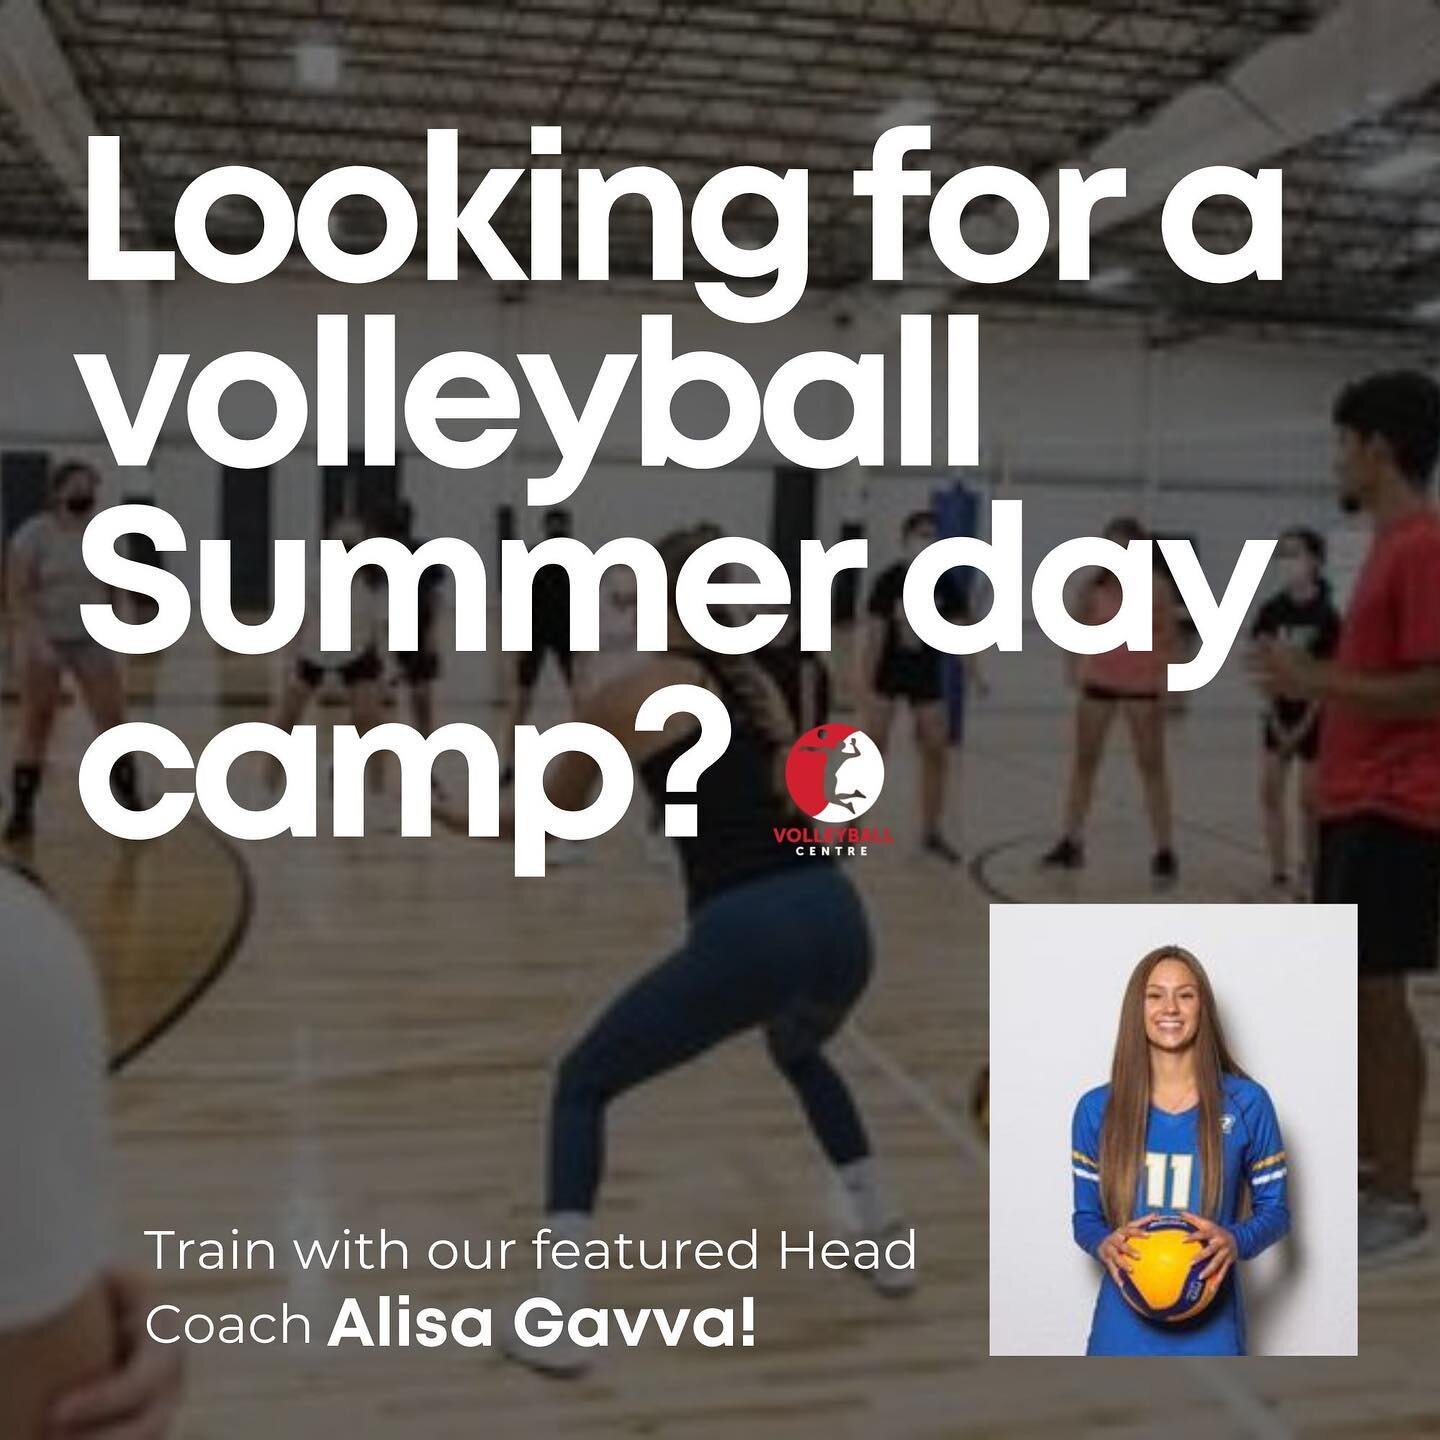 We are running Academy Day Camps this summer in Vaughan! After the success of our Fall, Winter, and Spring sessions, we are now excited to offer 2 fun filled summer weeks of everything VOLLEYBALL. 

If you are a parent looking for a camp to send your